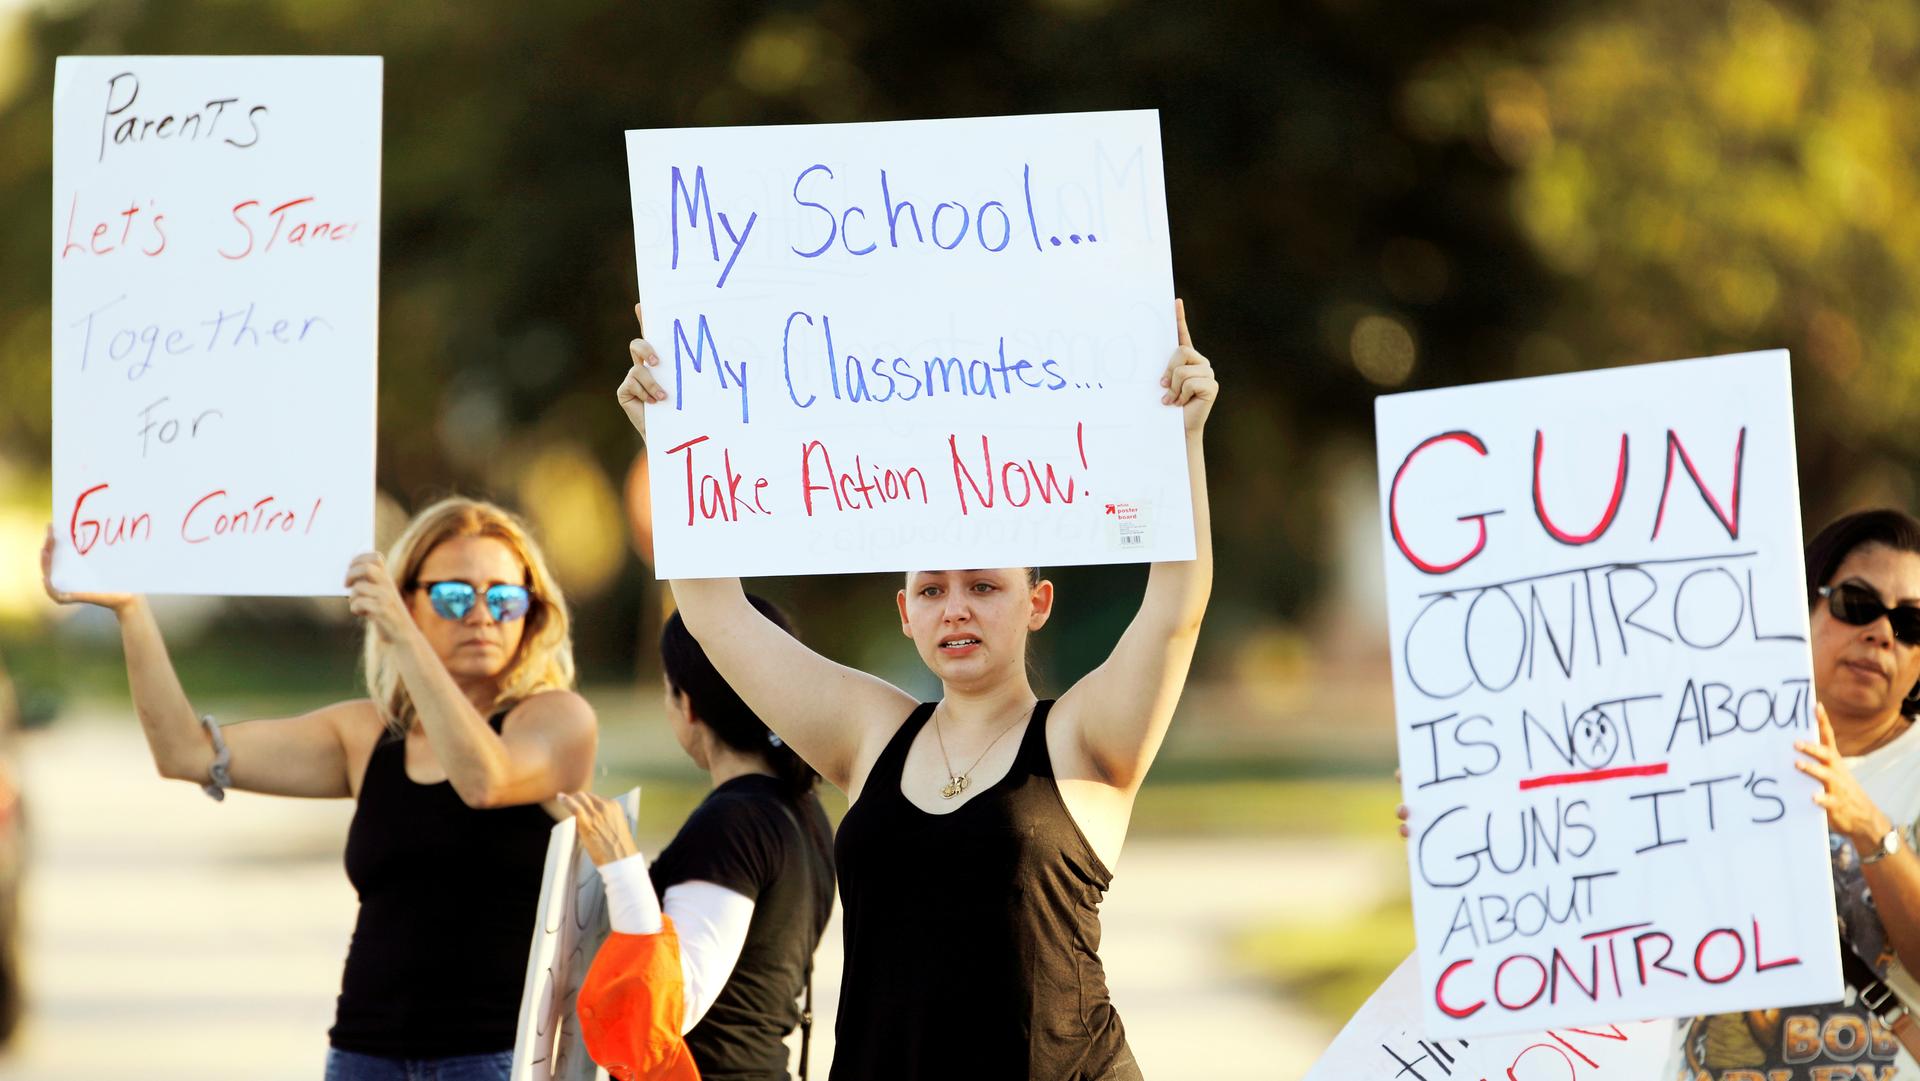 Angelina Lazo (C), an 18-year-old senior at Marjory Stoneman Douglas High School, lost two friends in the shooting at her school. She joined other gun control proponents with placards at a street corner in Coral Springs, Florida, on Feb. 16, 2018.